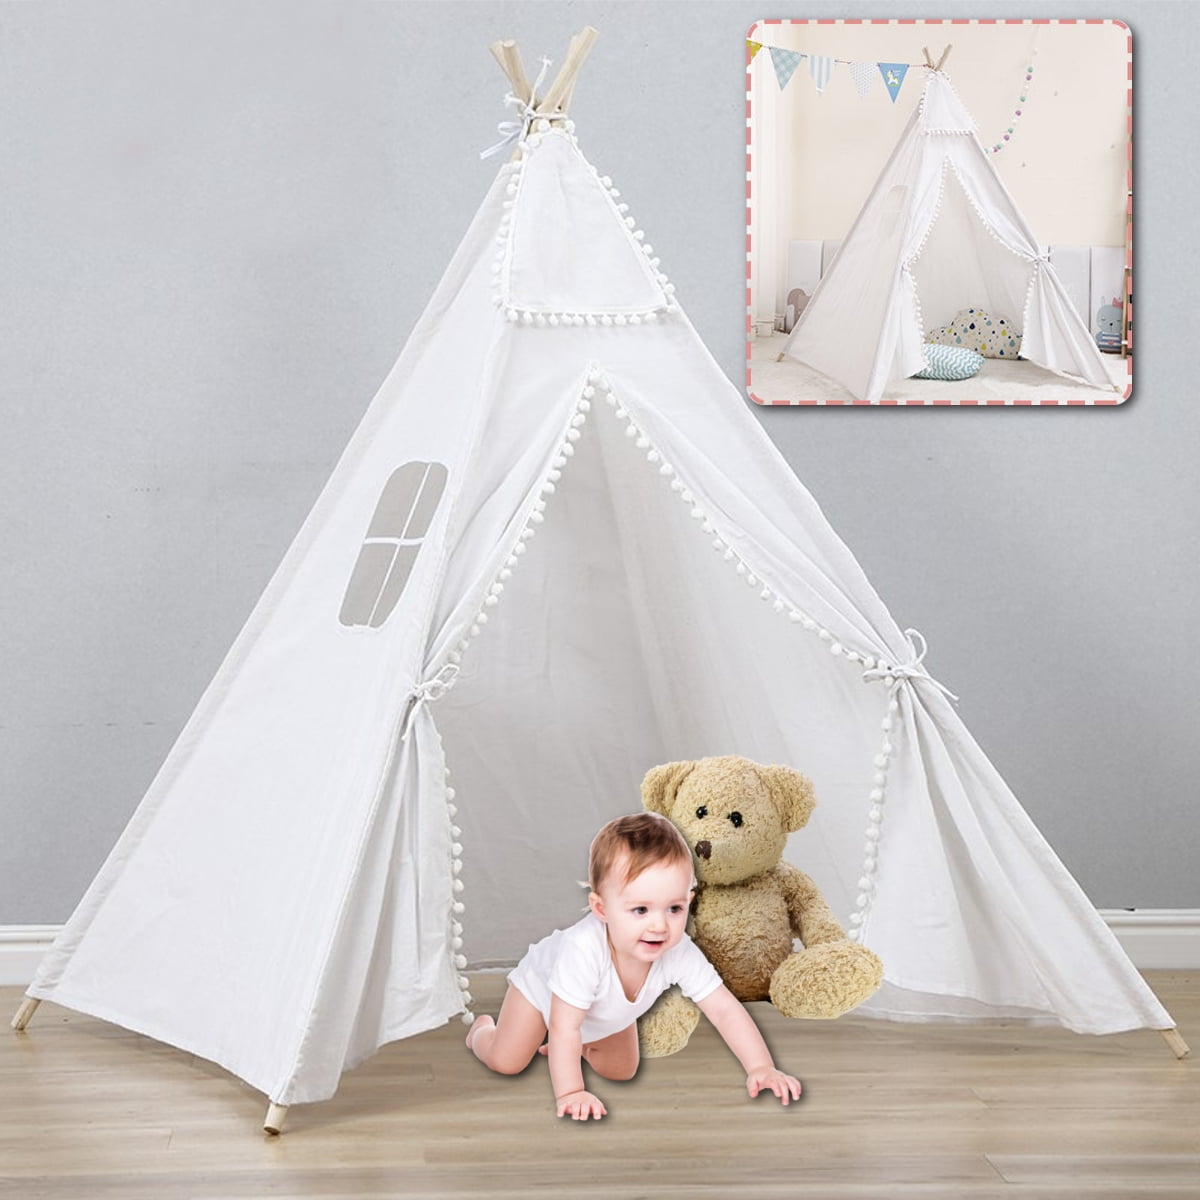 Details about   3in1 kids baby tent cute teepee tunnel large play house indoor outdoor ball pit 